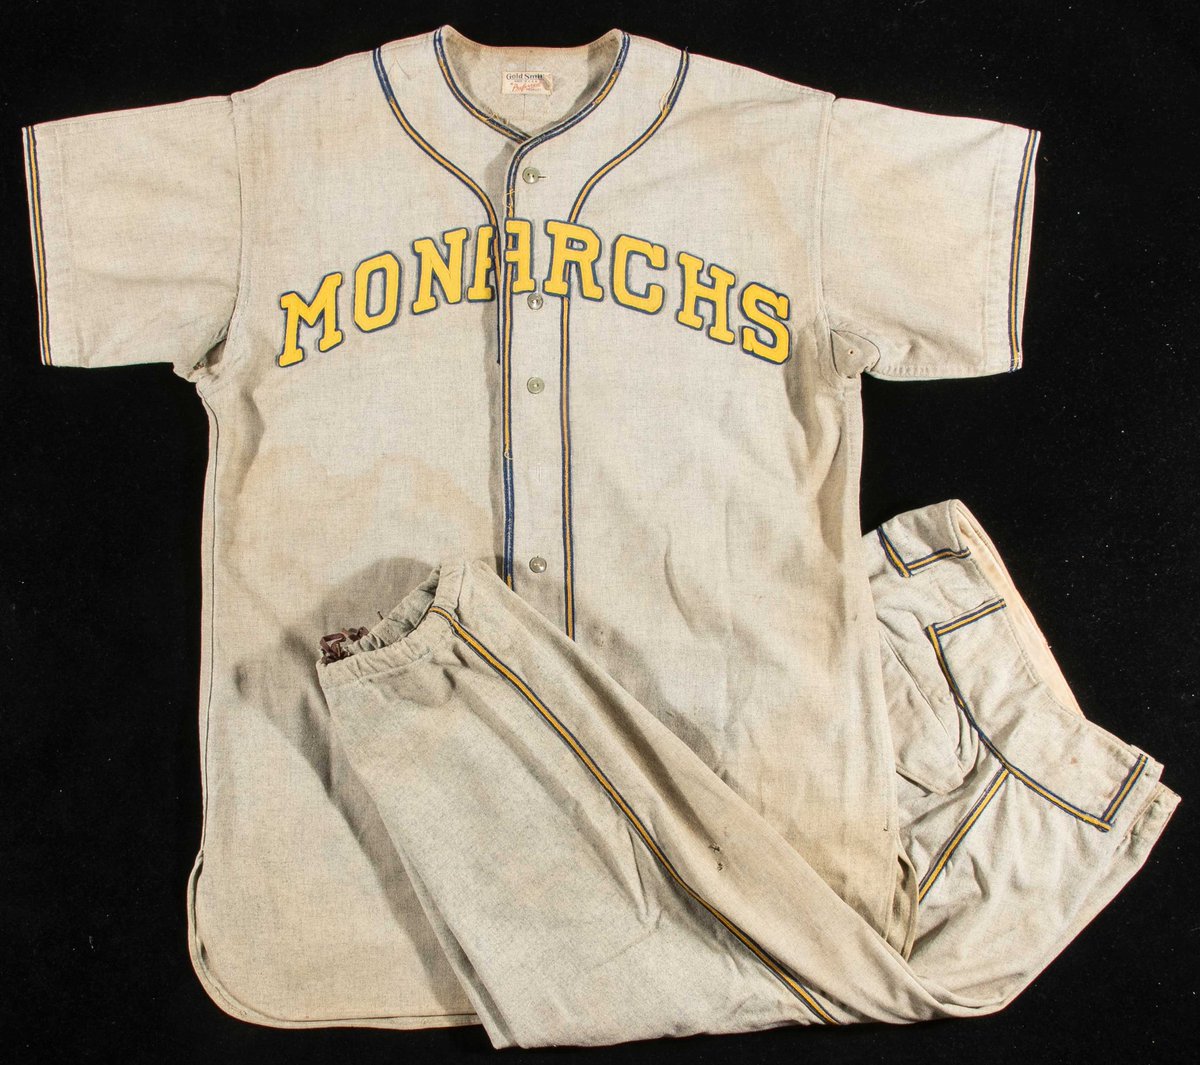 HUGE congrats to our dear friend @nlbmprez for winning the 1945 Monarchs uniform in our @SluggerMuseum auction. Bob has been a trusted colleague for several decades and I am pleased to announce we will contributing $2,500 towards his campaign for the uniform.